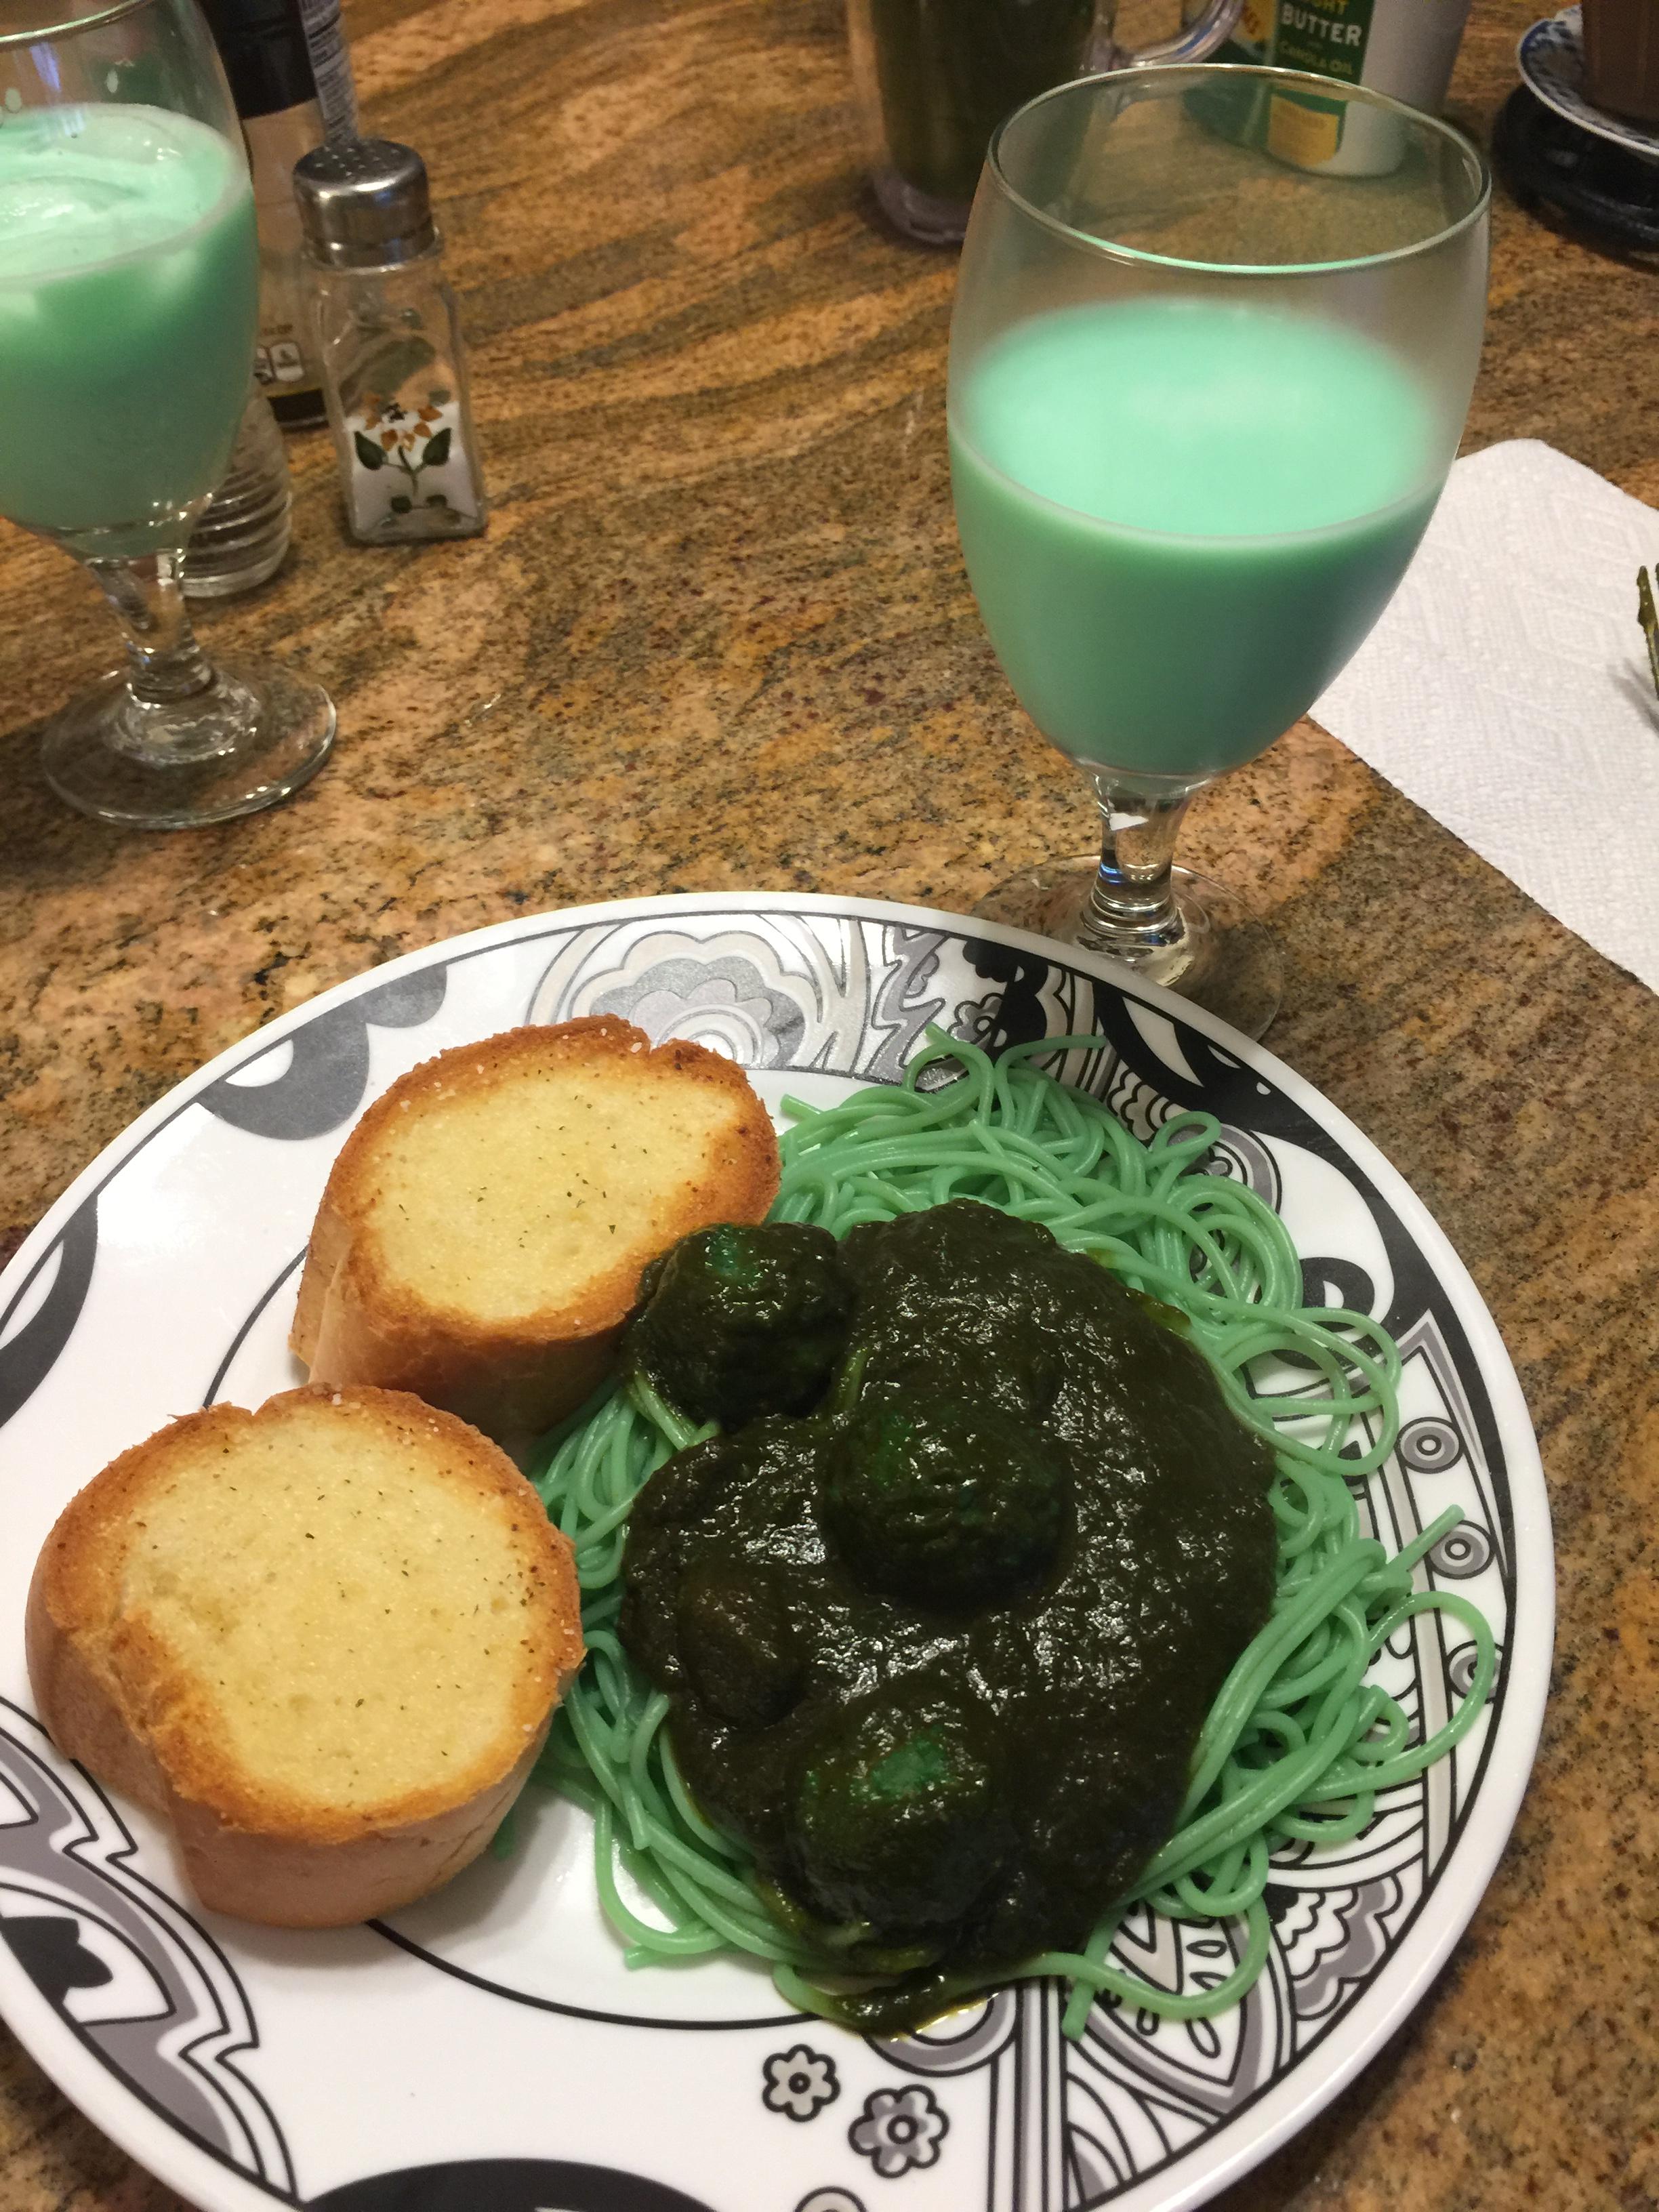 No amount of pinching could wake you from this fever dream of a St. Patrick's day meal.